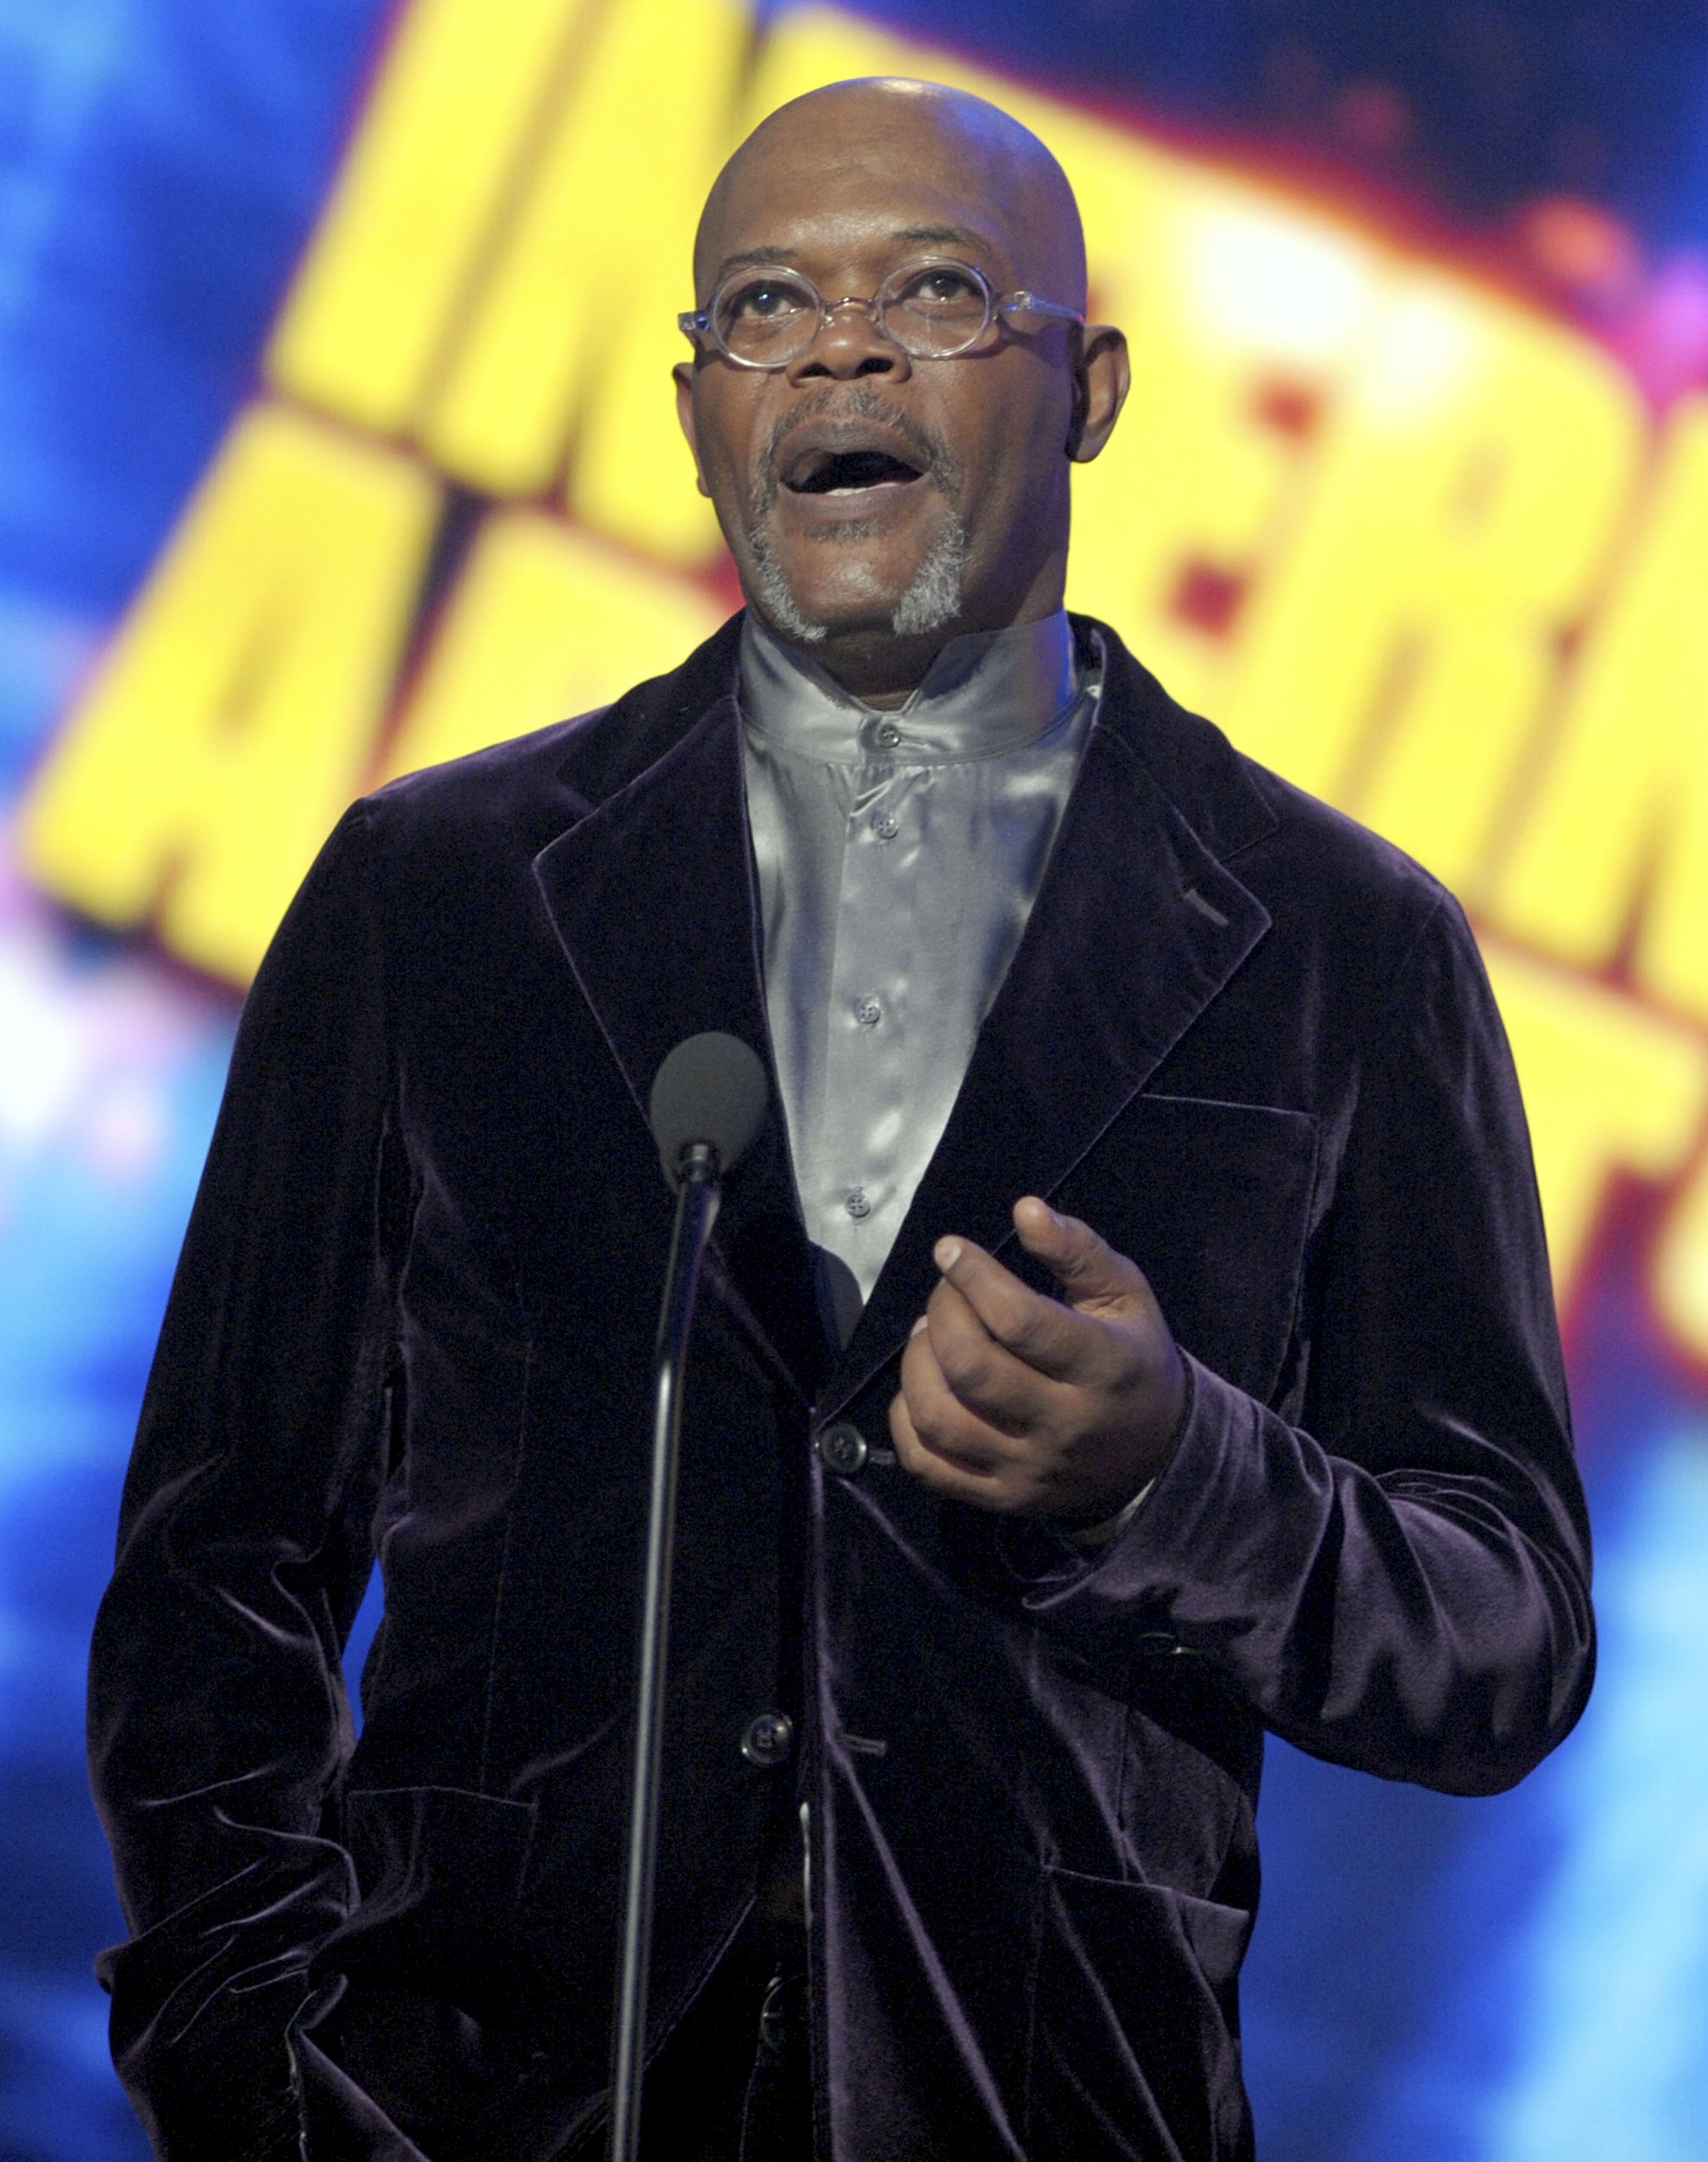 Samuel L. Jackson speaks onstage at the 2009 American Music Awards at Nokia Theatre L.A. Live on November 22, 2009 in Los Angeles, California | Source: Getty Images